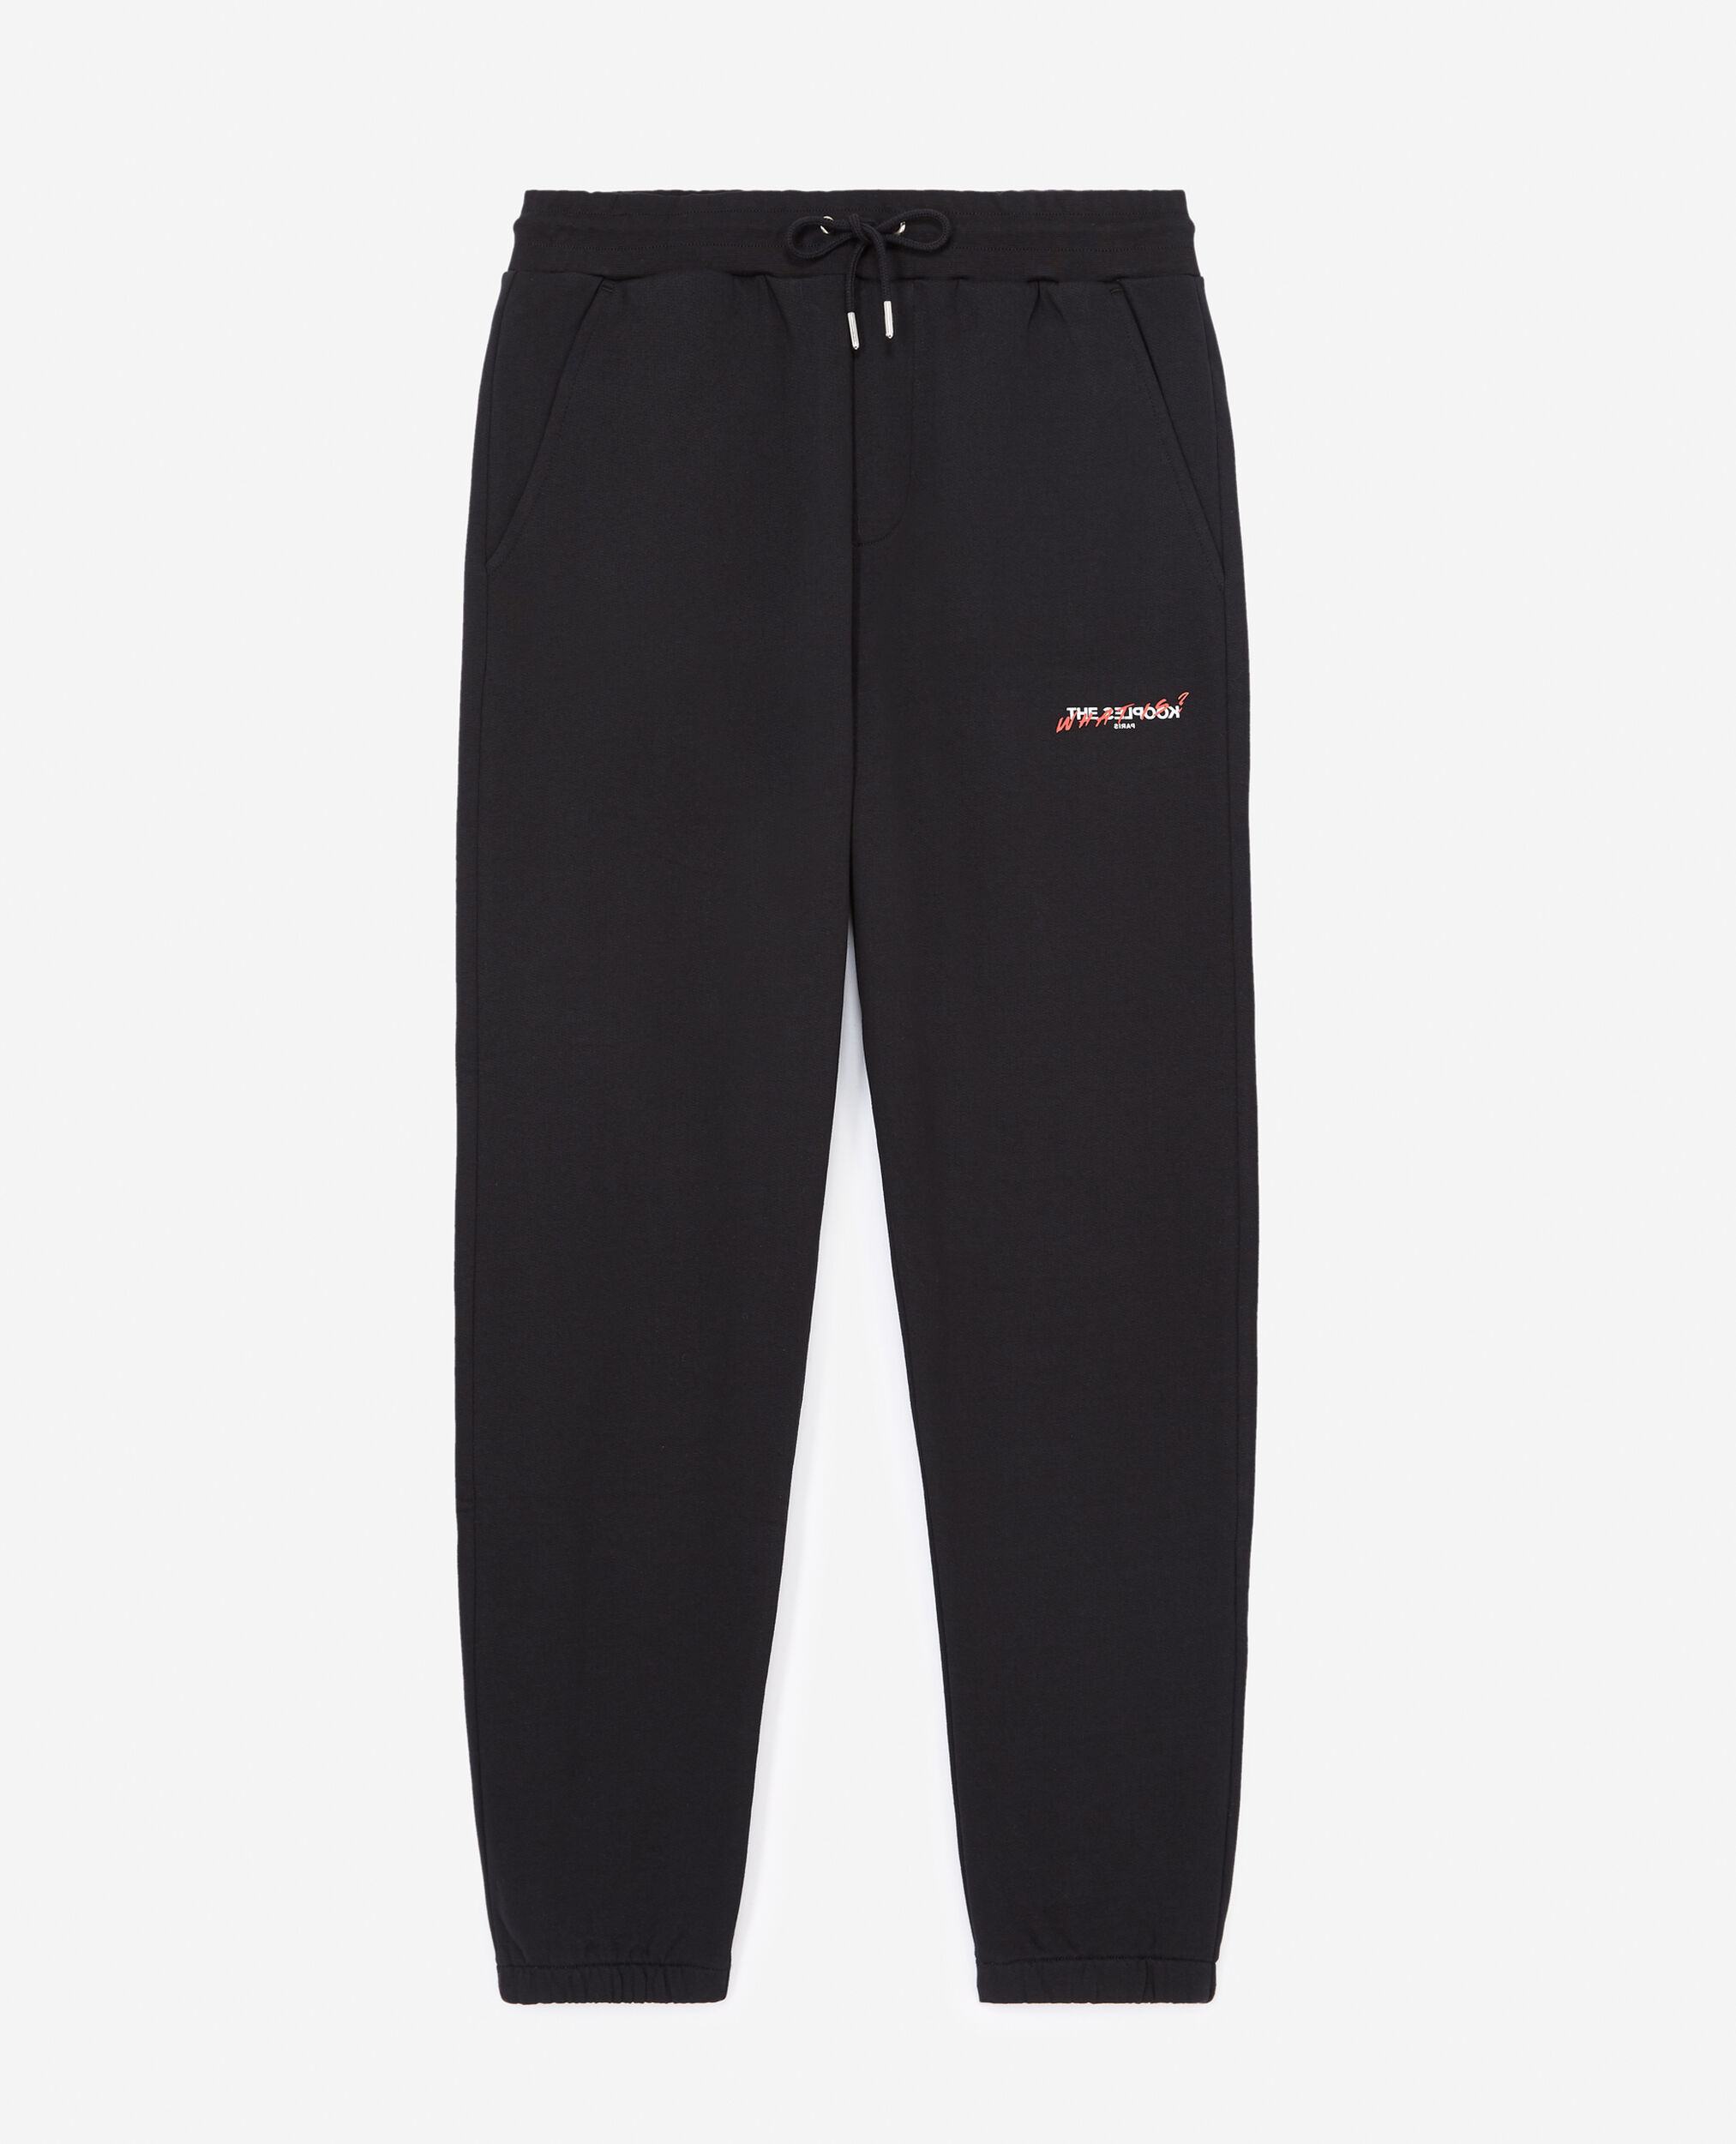 Black jogging suit with print what is, BLACK, hi-res image number null